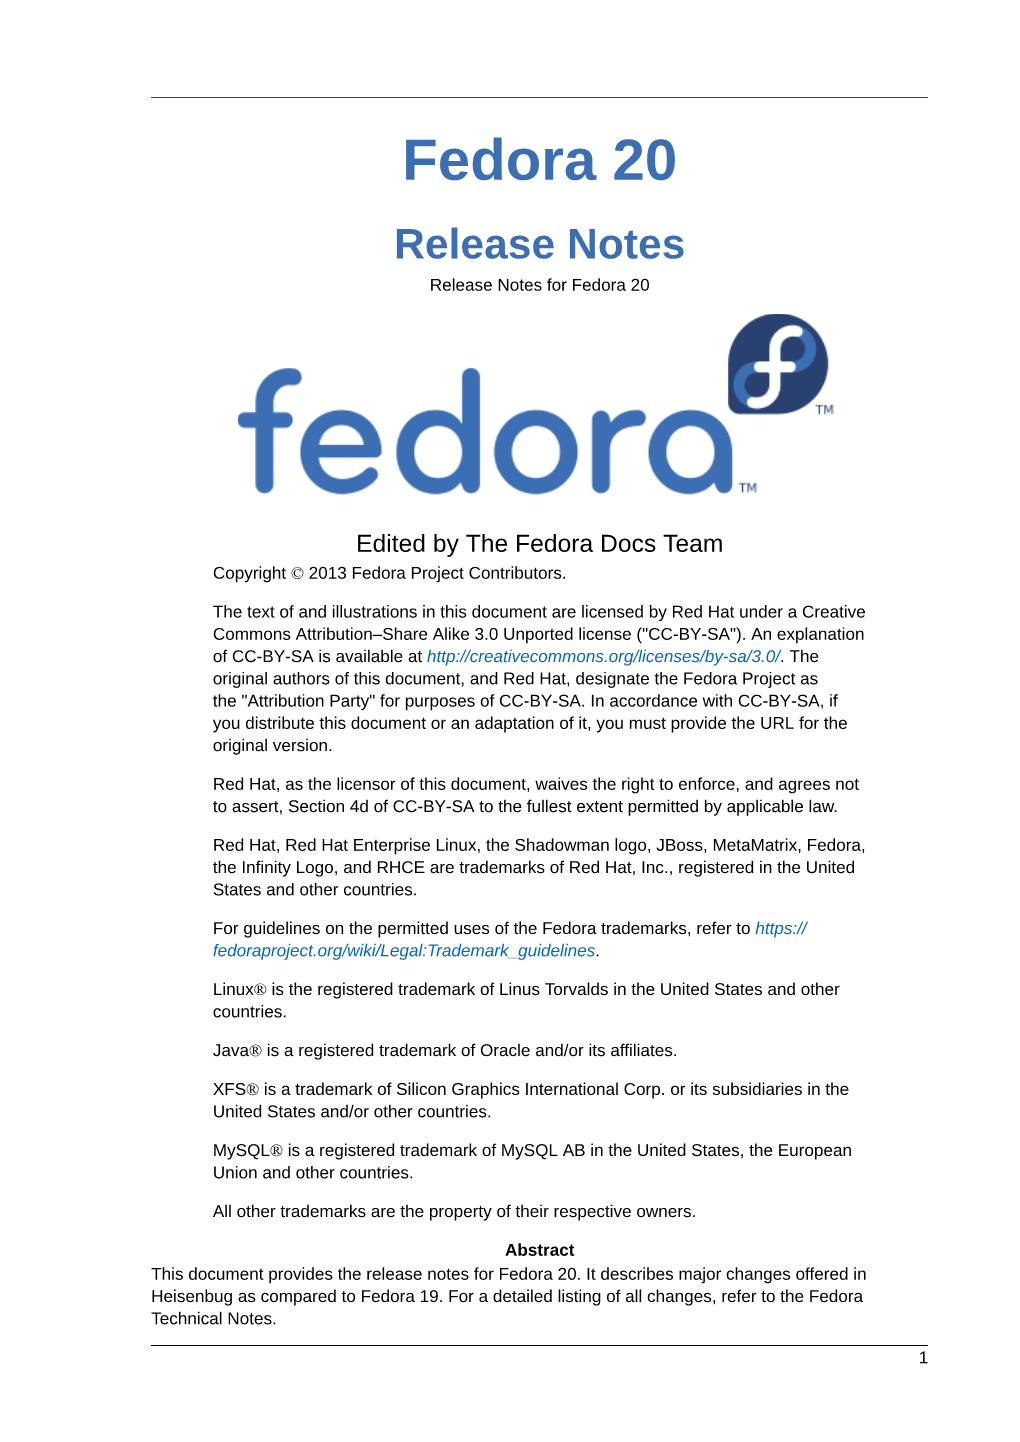 Release Notes for Fedora 20